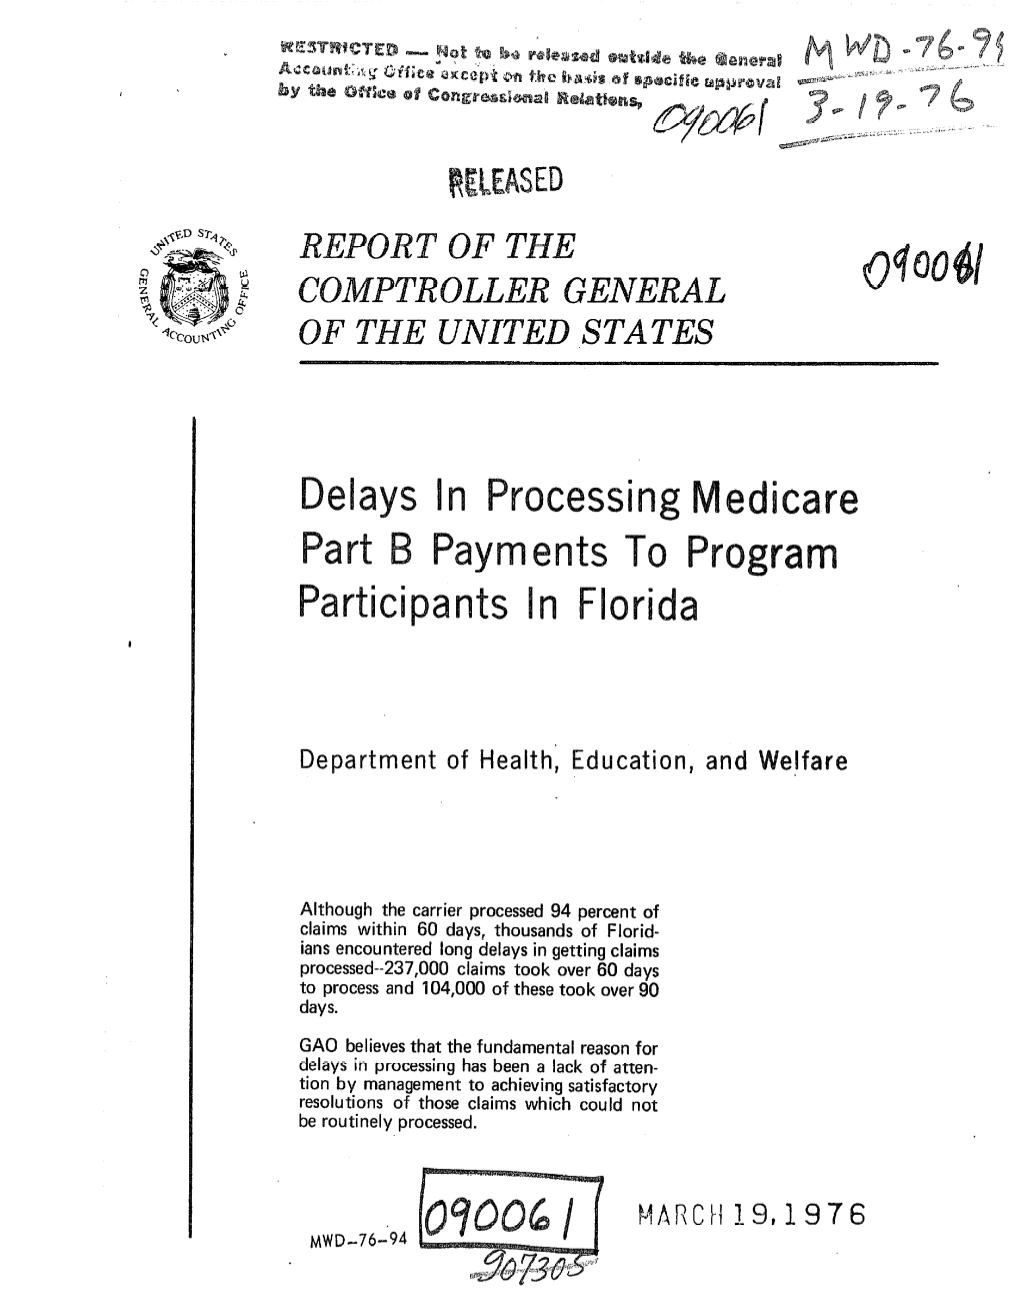 MWD-76-94 Delays in Processing Medicare Part B Payments To